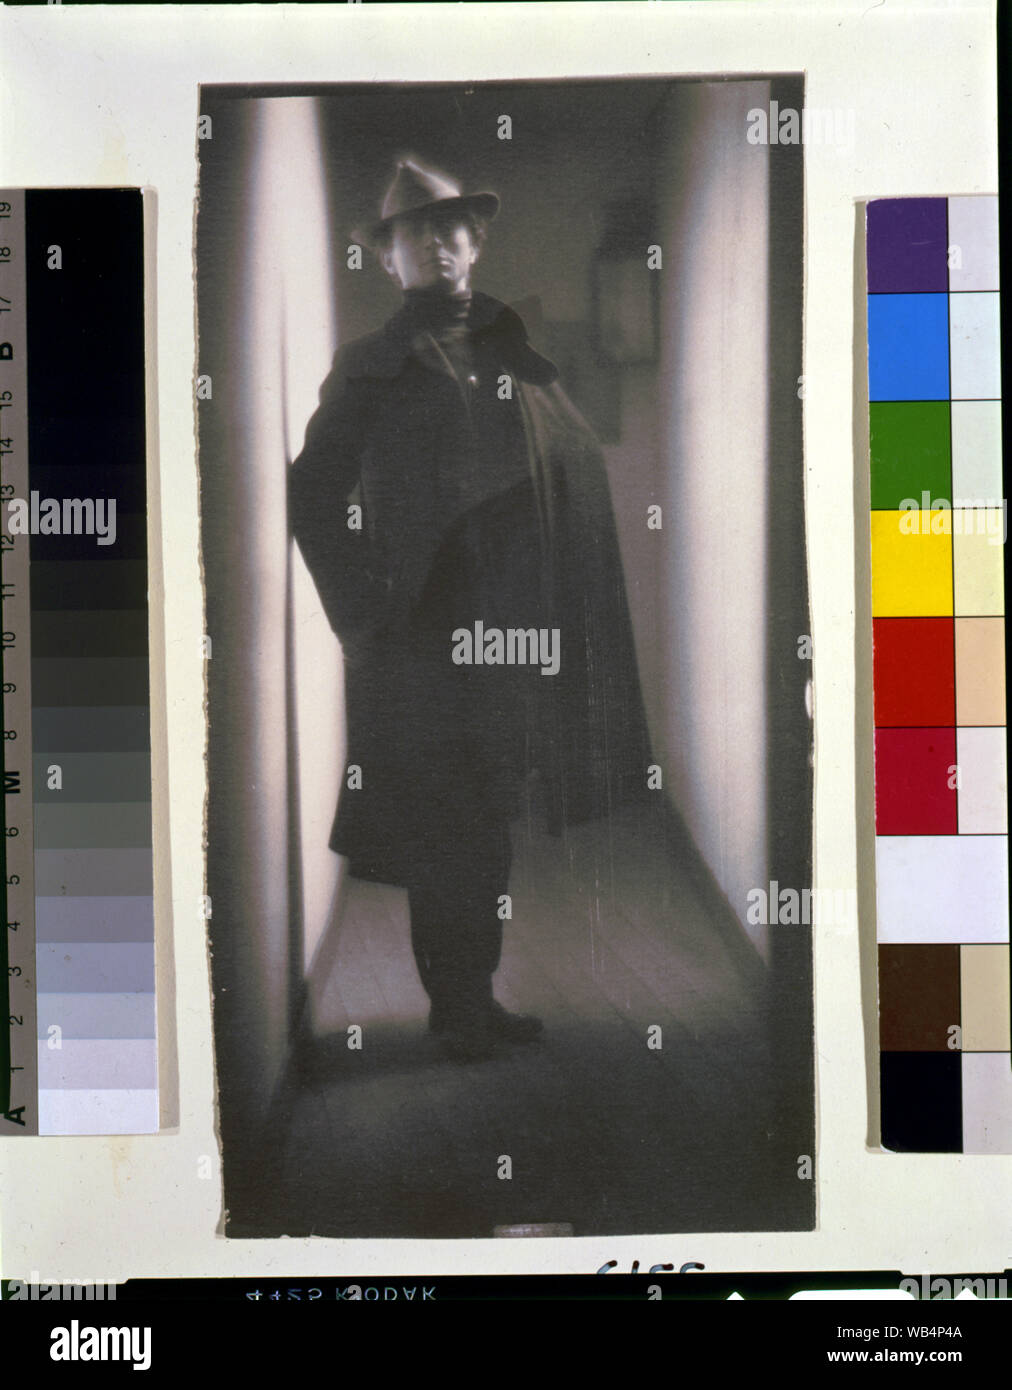 Edward Steichen, in coat and hat, standing in hallway, portrait Abstract/medium: 1 photographic print : platinum, hand applied ; 9 9/16 x 4 15/16 in. (242 x 125 mm). Stock Photo